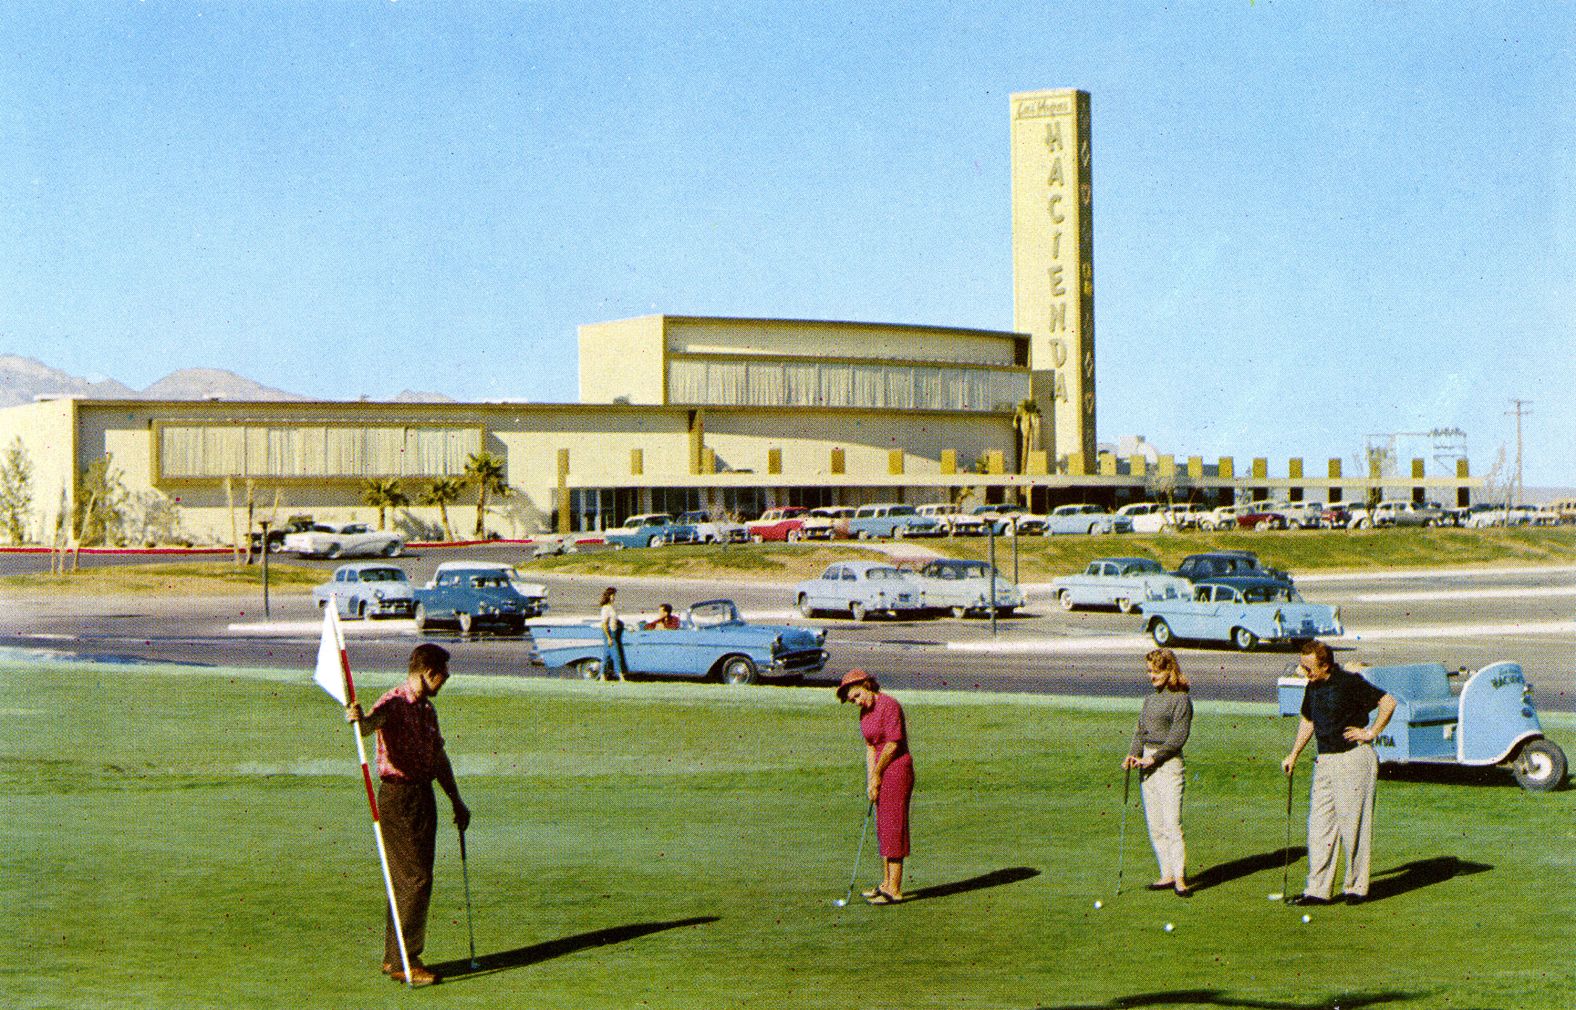 People play in front of the Hacienda Hotel circa 1960.